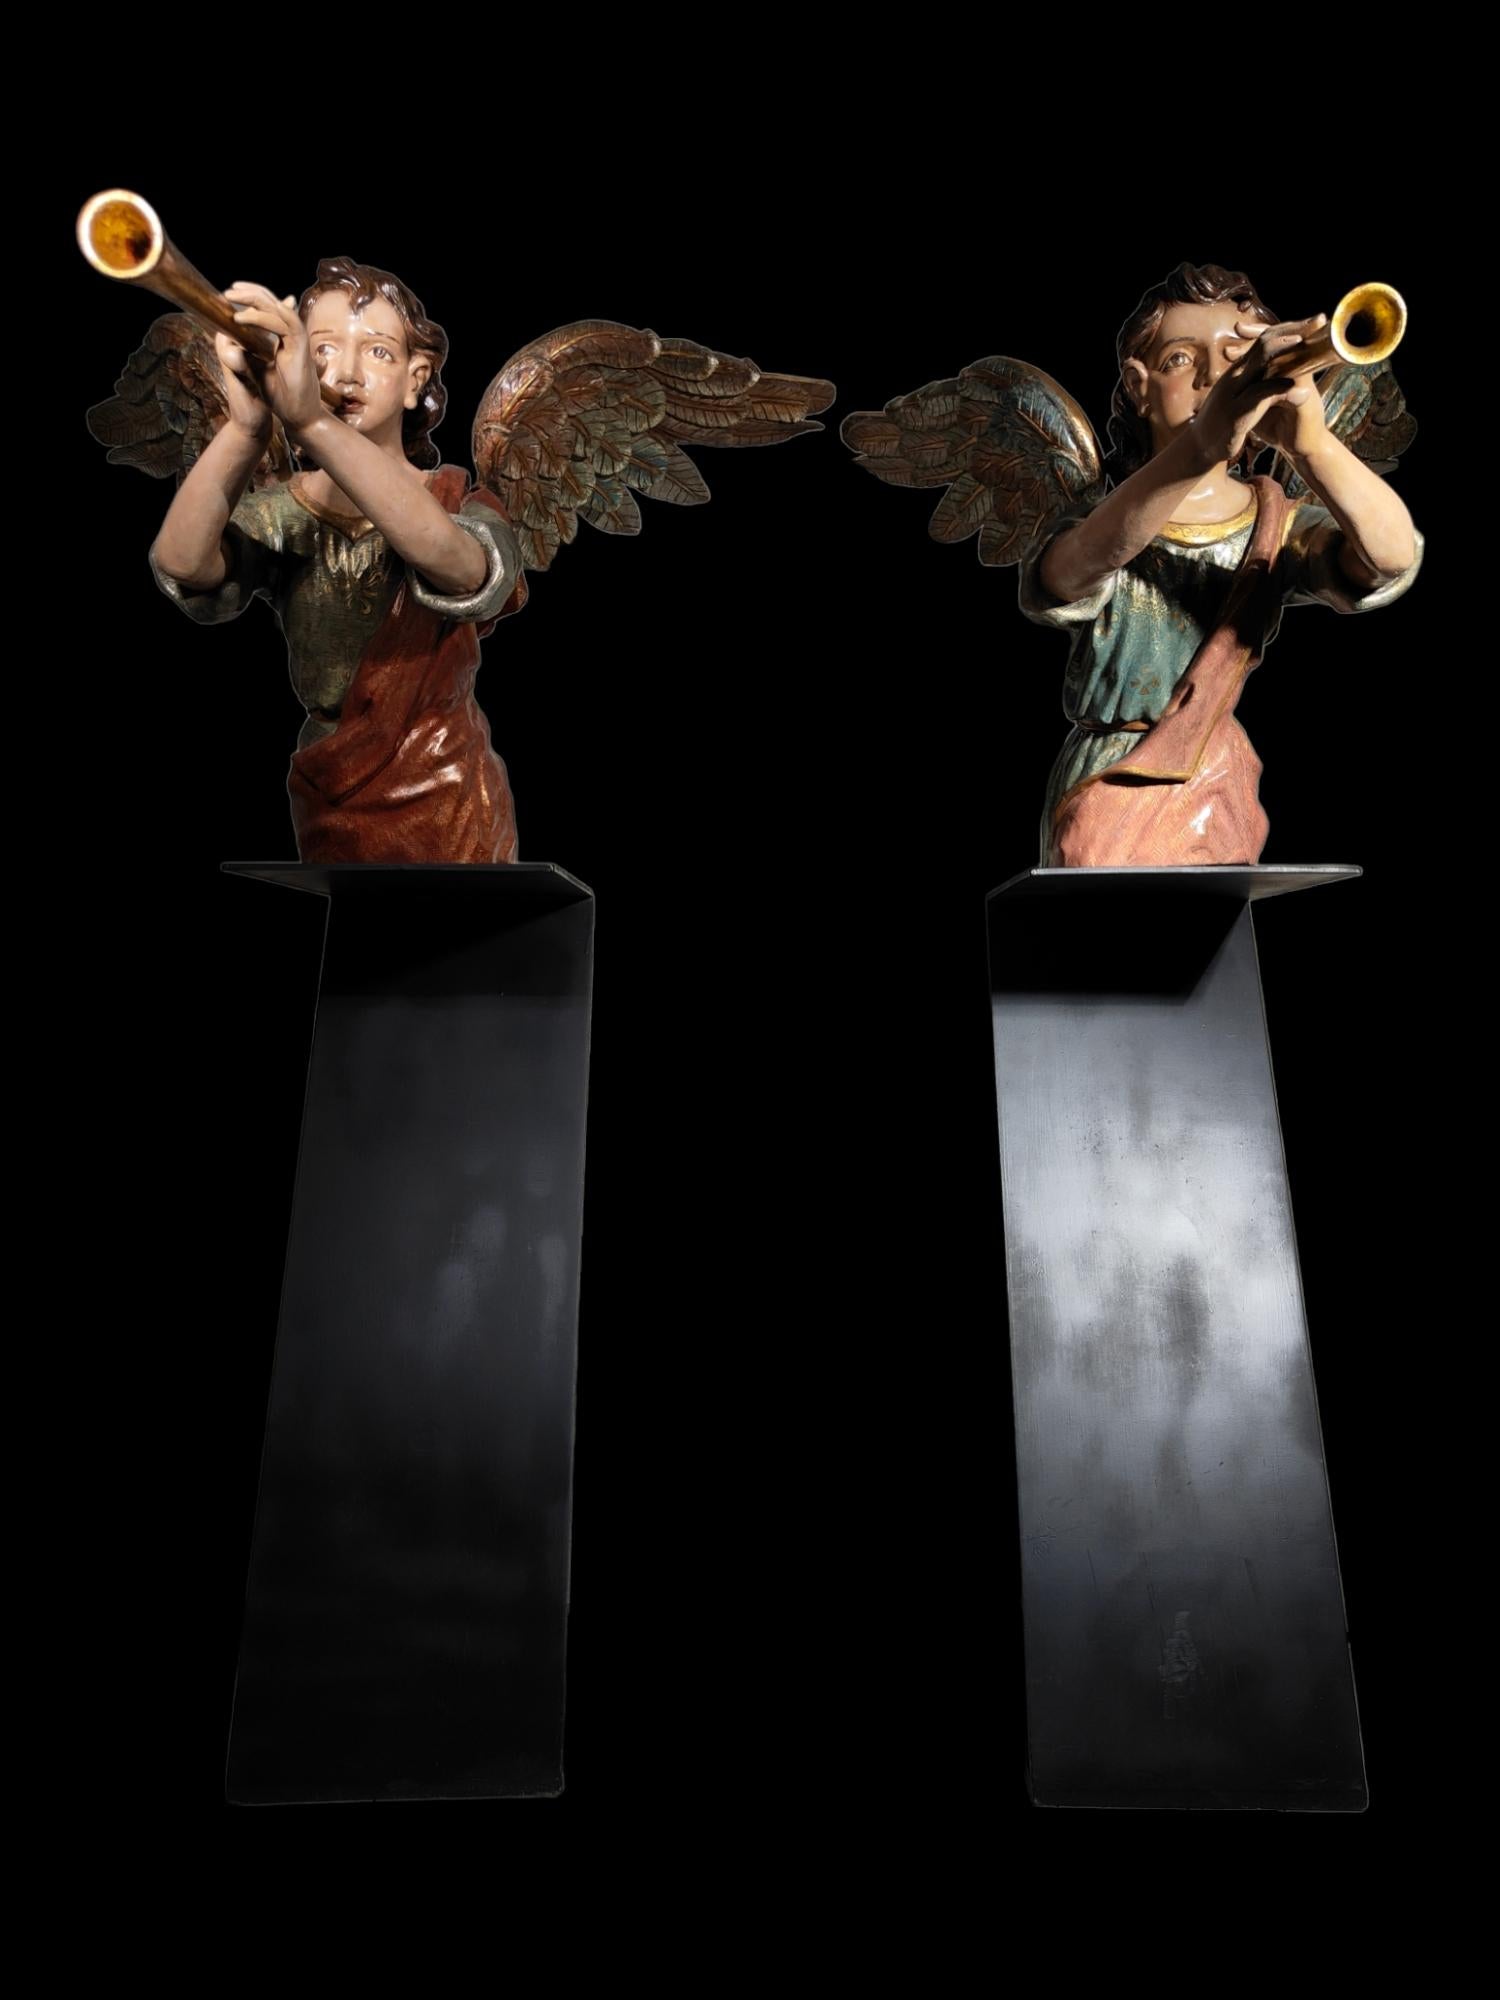 Important Pair Of Cherubs In Carved, Gilded And Polychrome Wood From The 17th Century.
It is of very good quality (see the work on the clothes). In very good conditions. The base is made of iron and is modern. Total height 165cm x 120cm long and